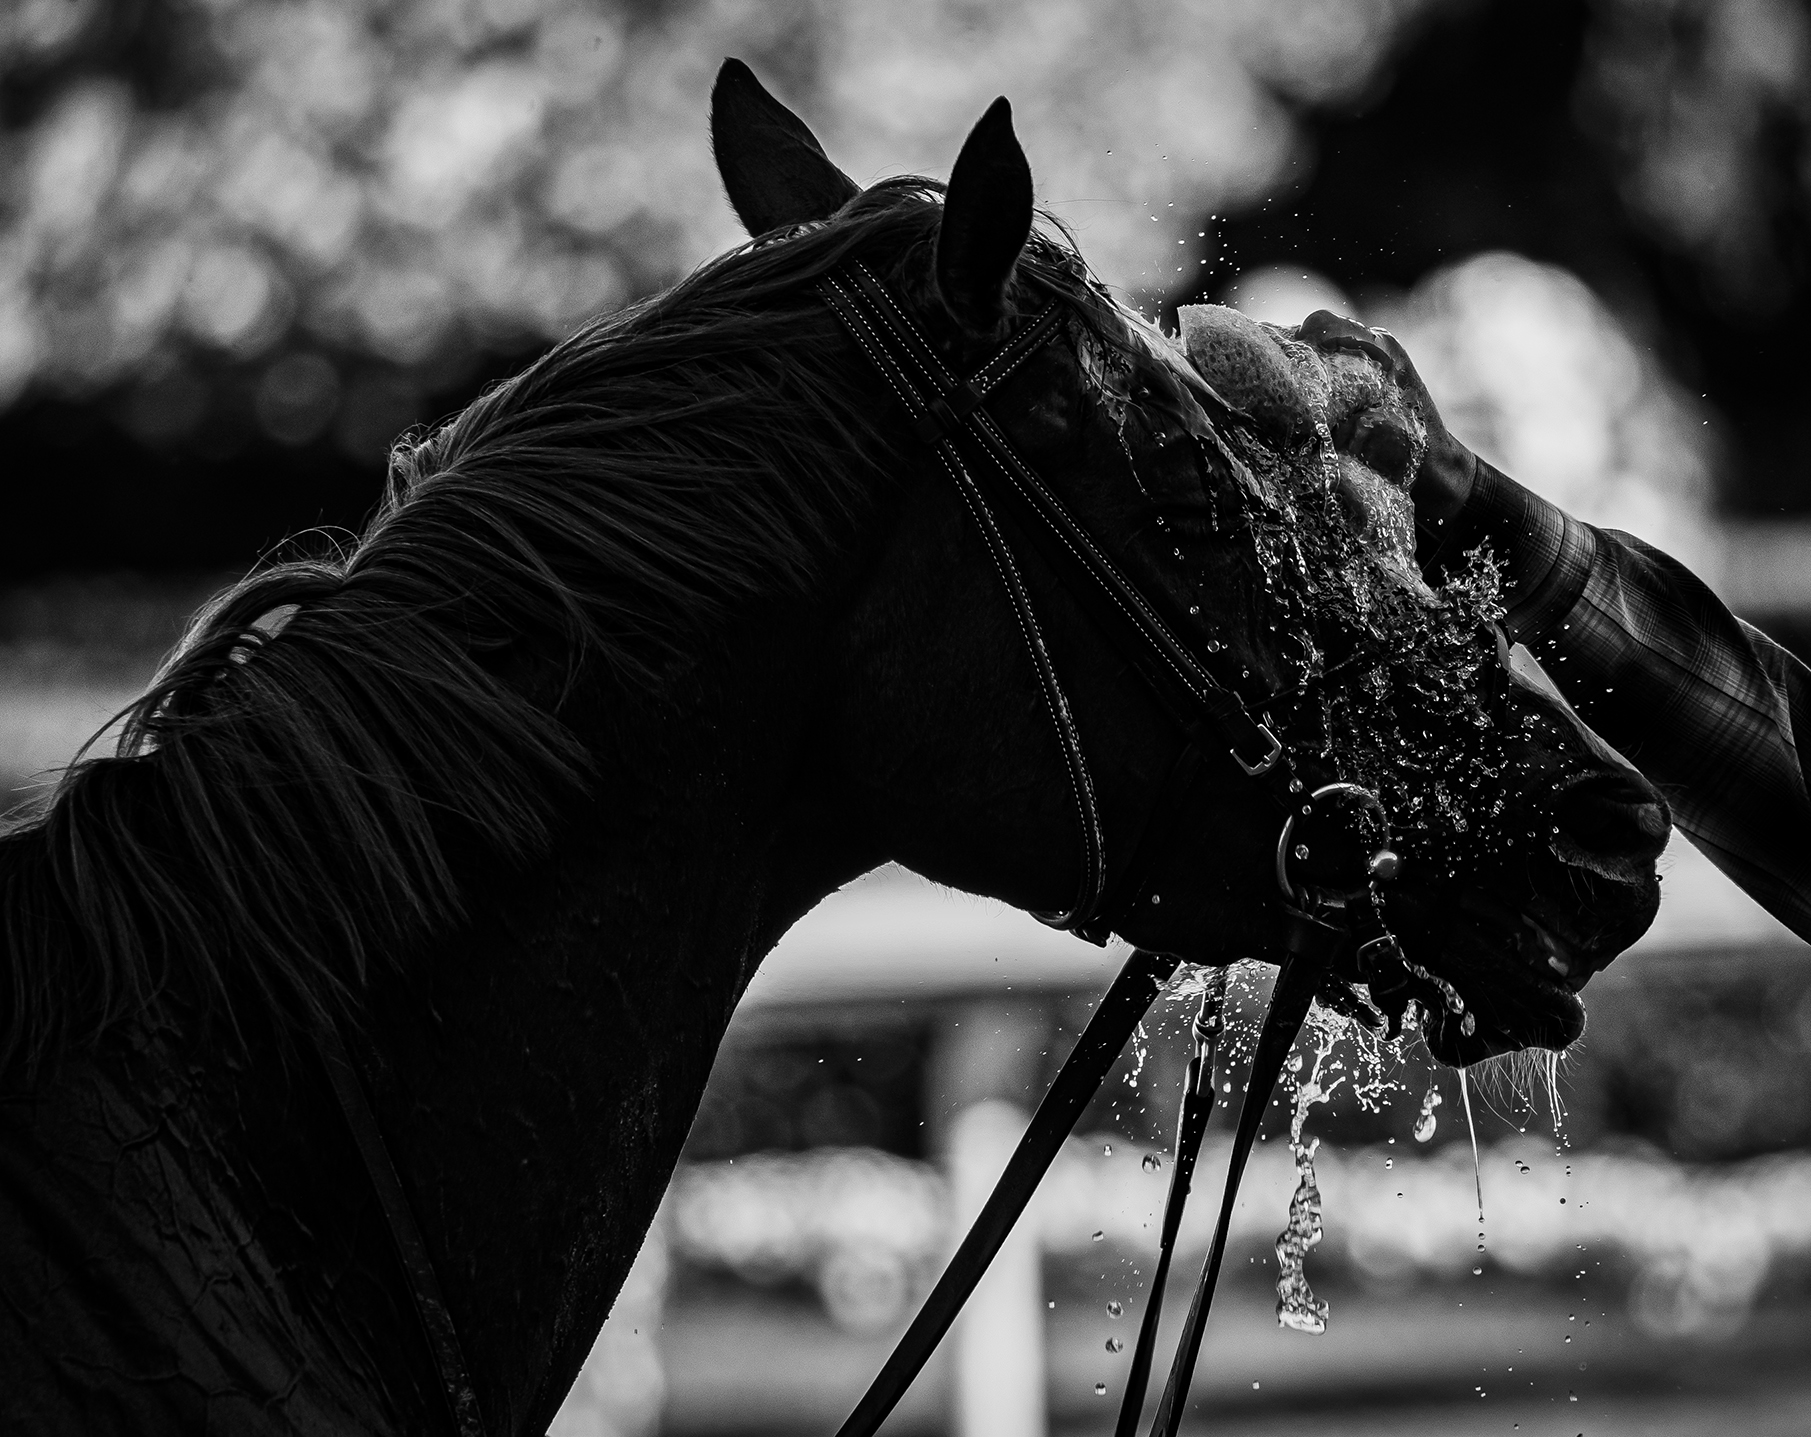 "The After-bath of a Stakes Race" (Oaklawn Park, Hot Springs, AR - April 2, 2023), photograph by Heather C. Jackson